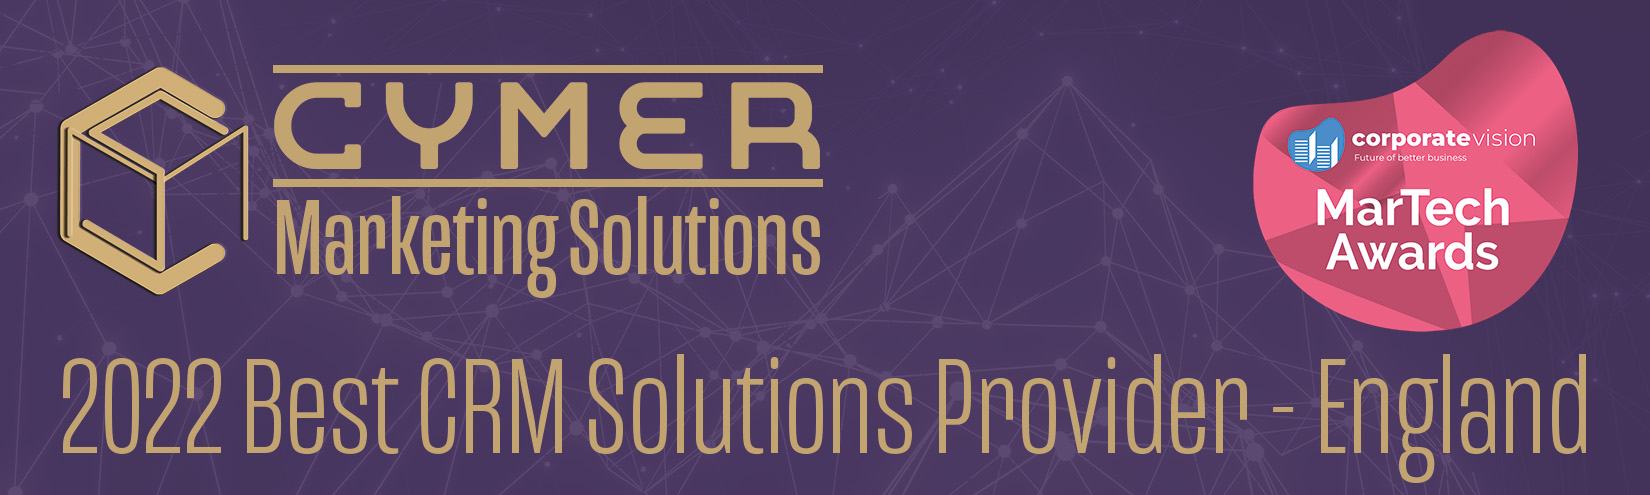 Cymer Marketing Solutions | 2022 MarTech Awards Best CRM Solutions Provider - England